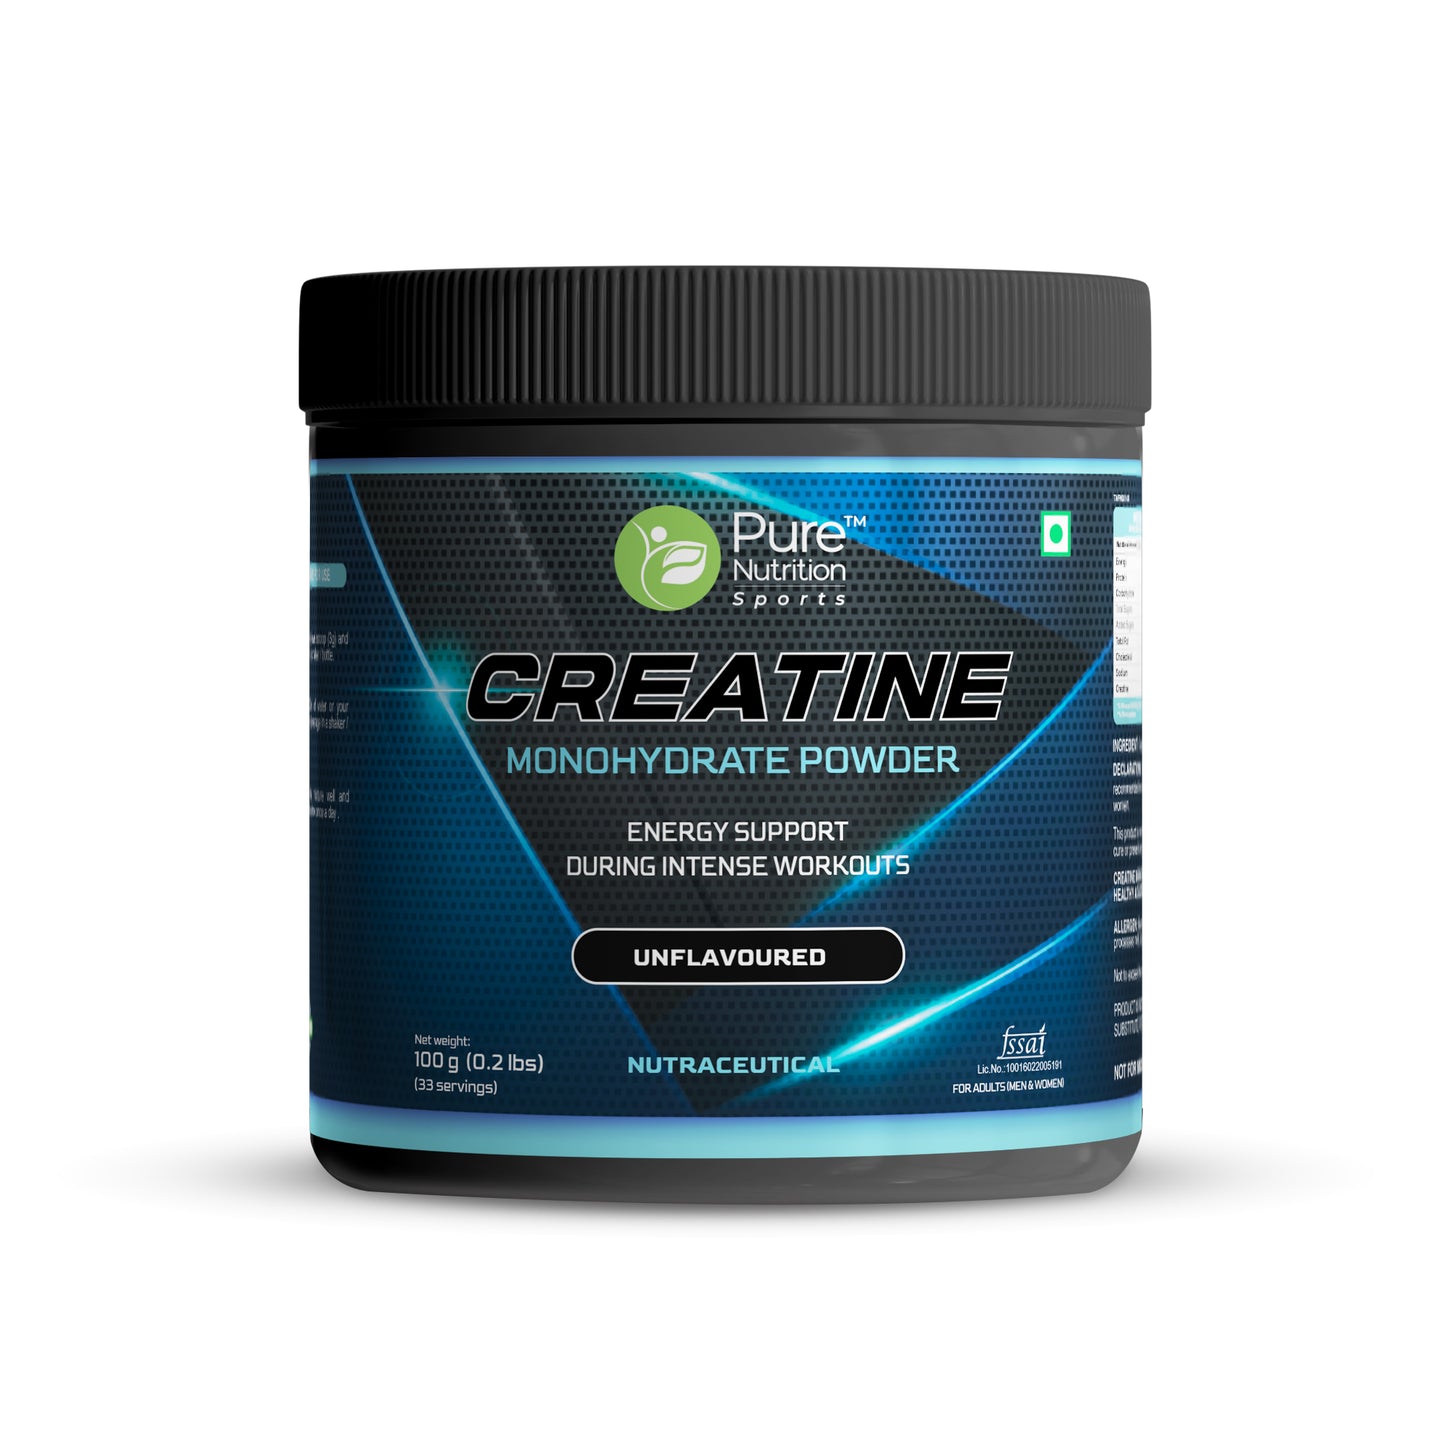 Creatine Monohydrate | Energy Support during Intense Workouts | Unflavoured | 100g - 33 Servings